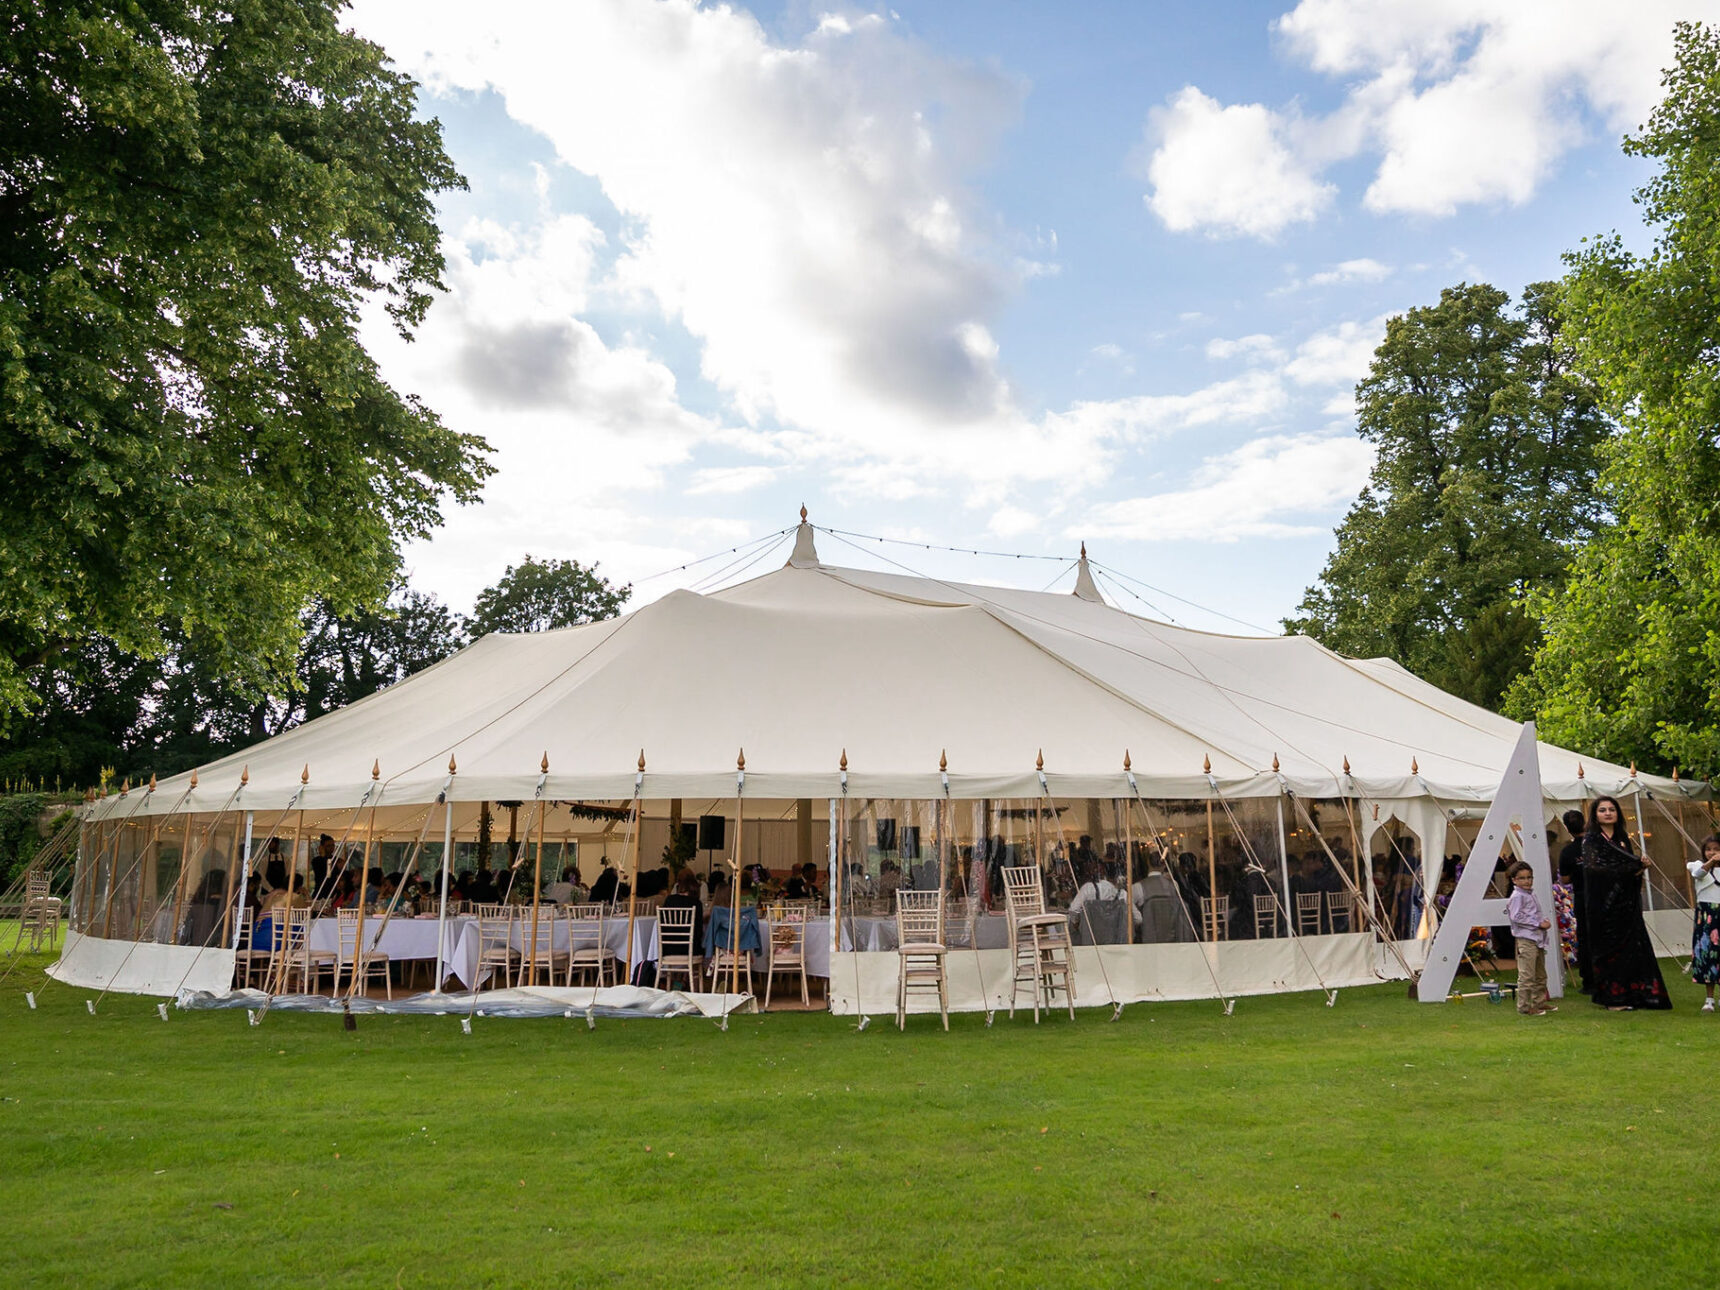 The North Lawn can comfortably accomodate large marquee weddings